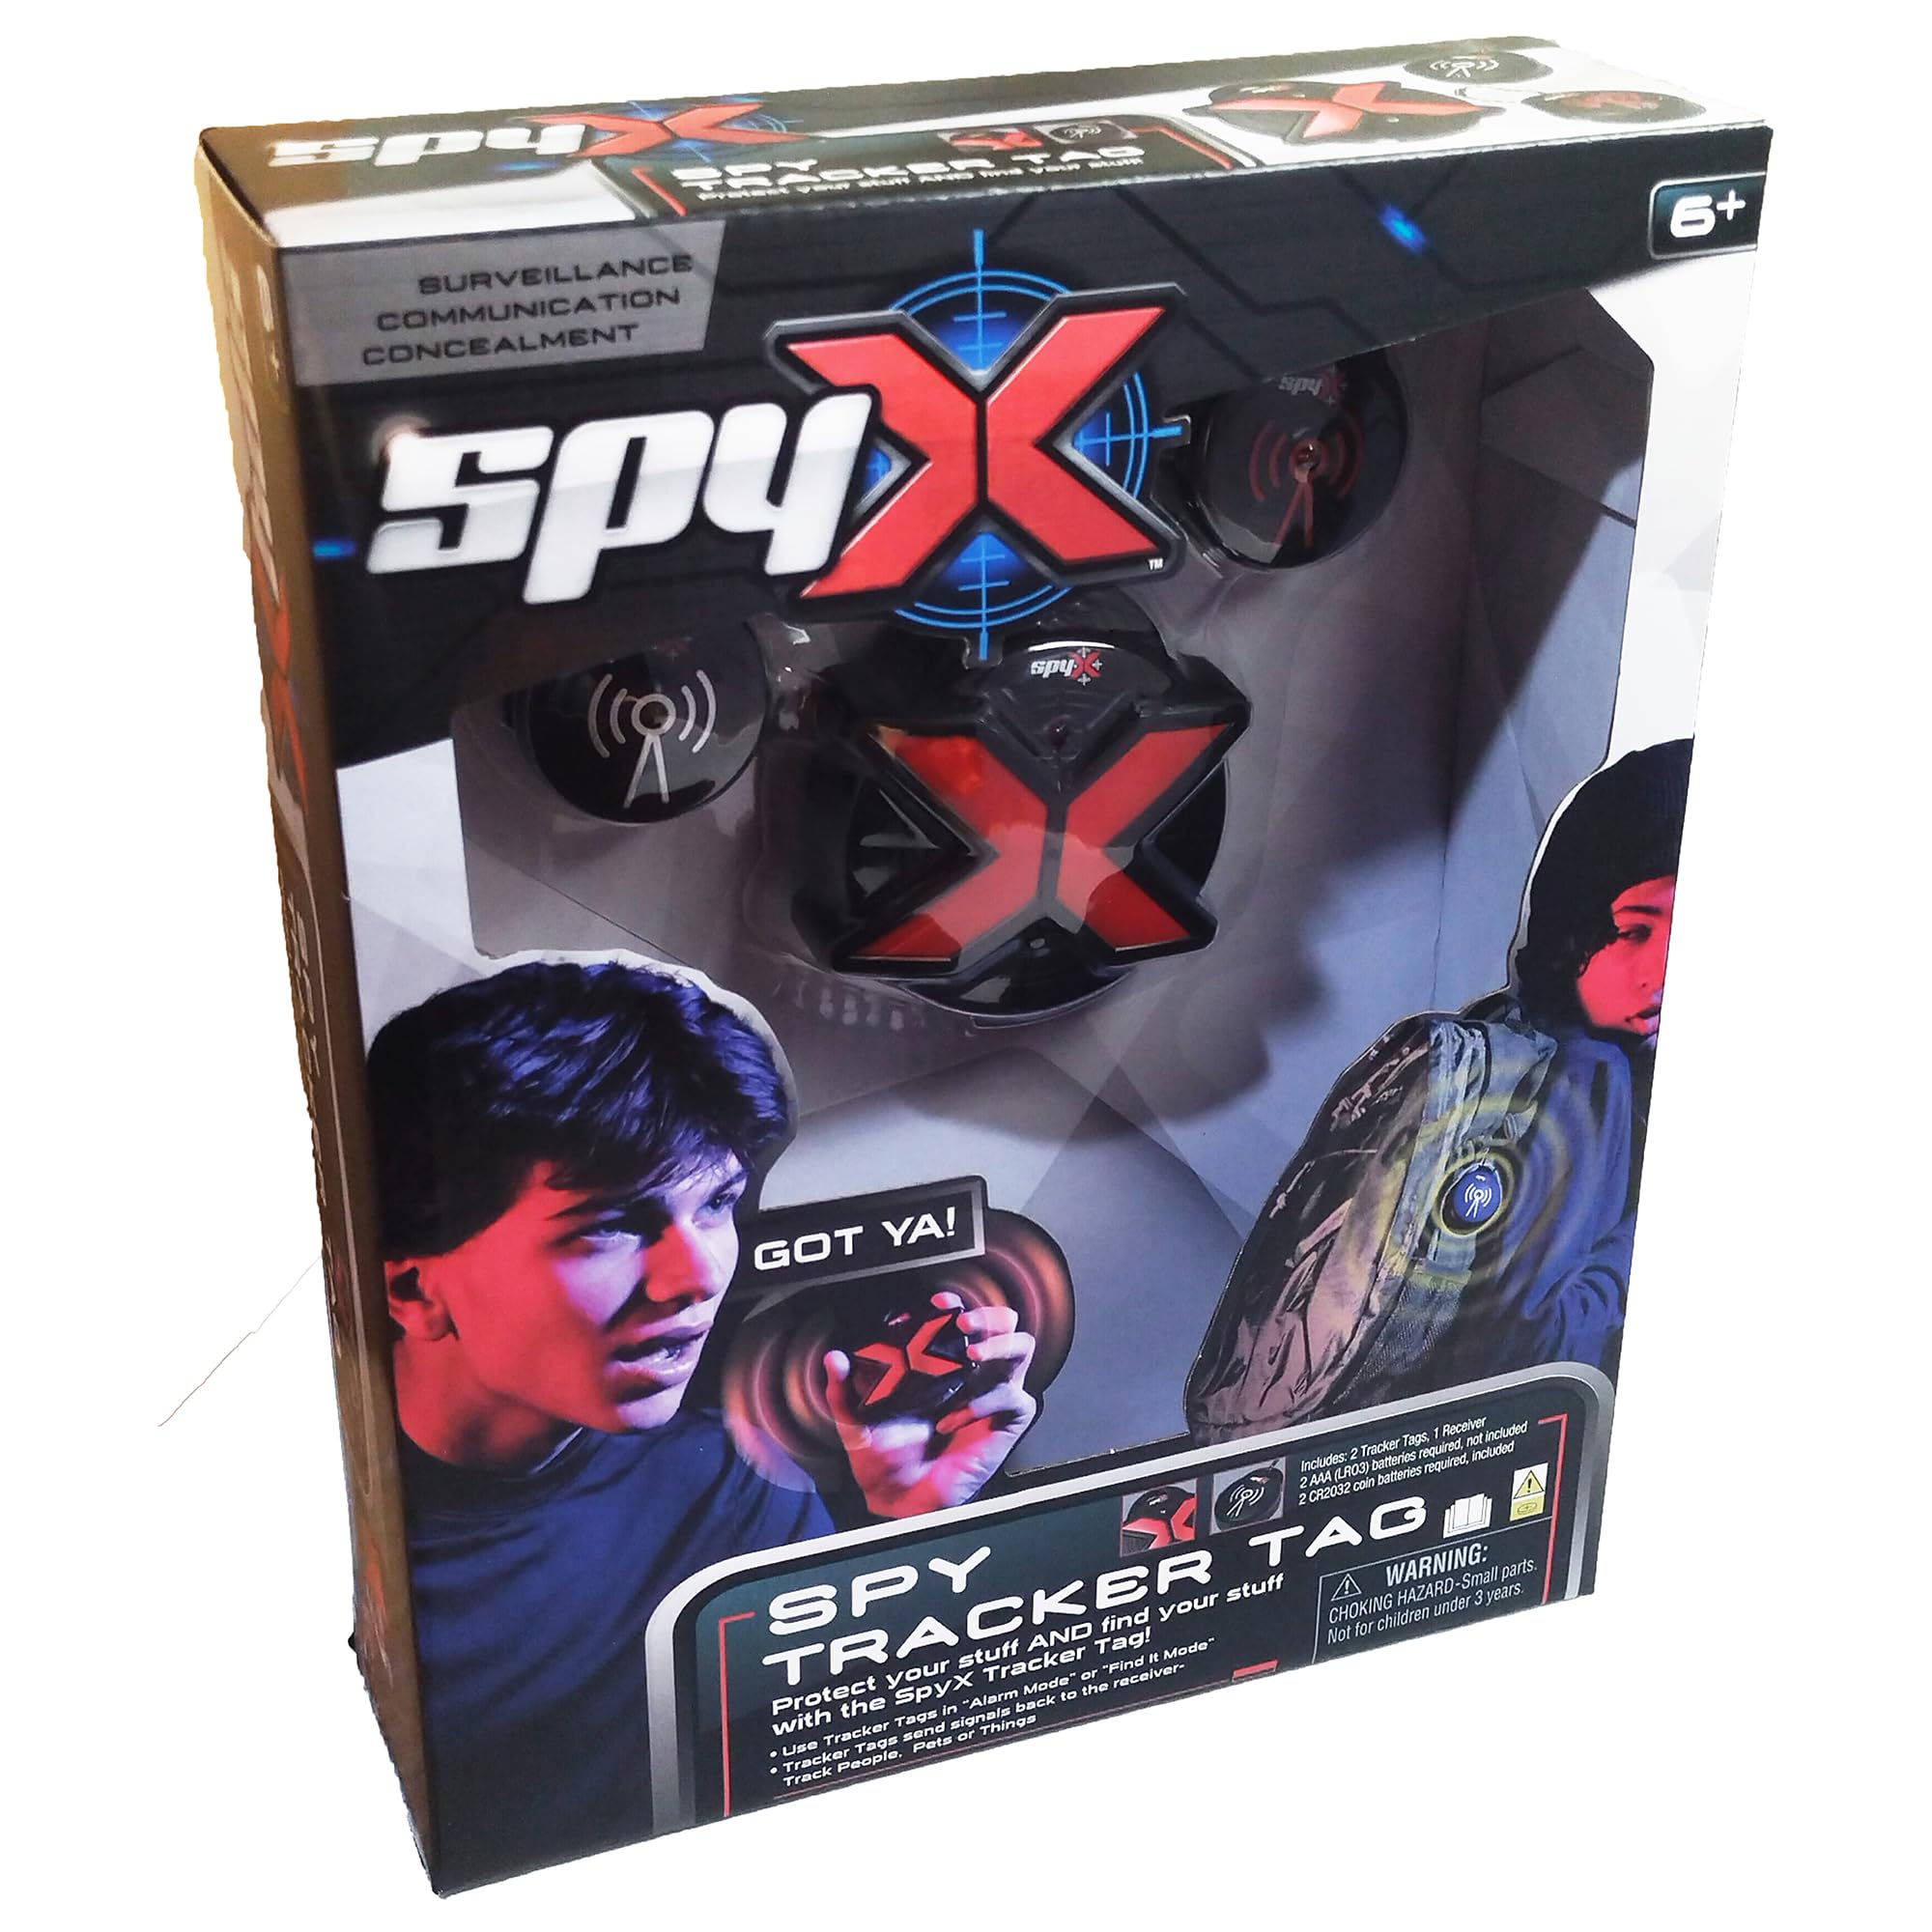 SpyX Spy Tracker Tag - Spy Tracking Toy Gadget for Kids. Protect & Find Your Stuff Or People You Want to Track. Alarm/Track Modes. 2 Spy Tags and 1 Receiver Included